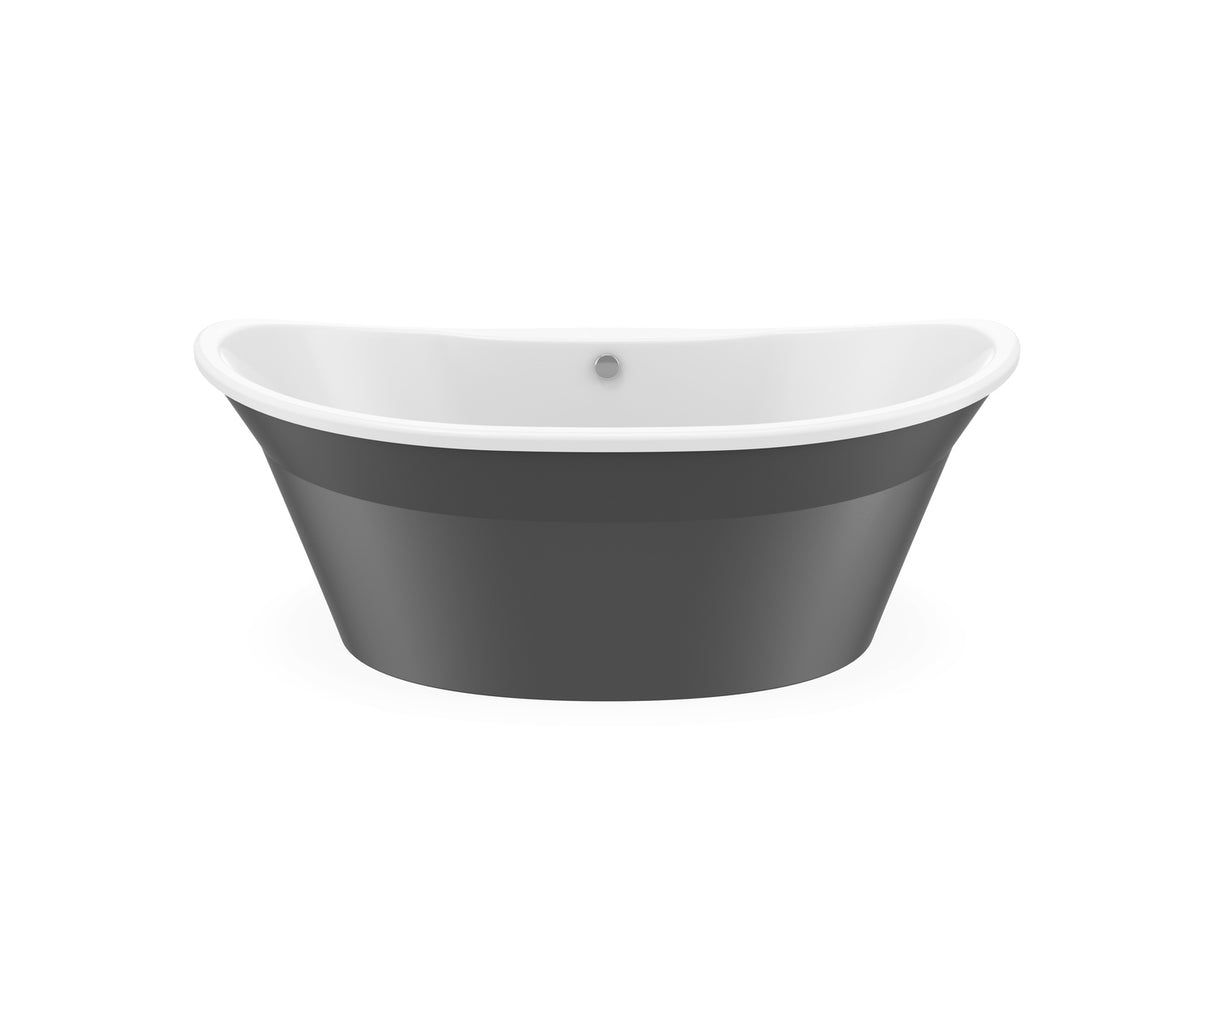 MAAX 106151-000-002-129 Orchestra 6636 AcrylX Freestanding Center Drain Bathtub in White with Thundey Grey Skirt